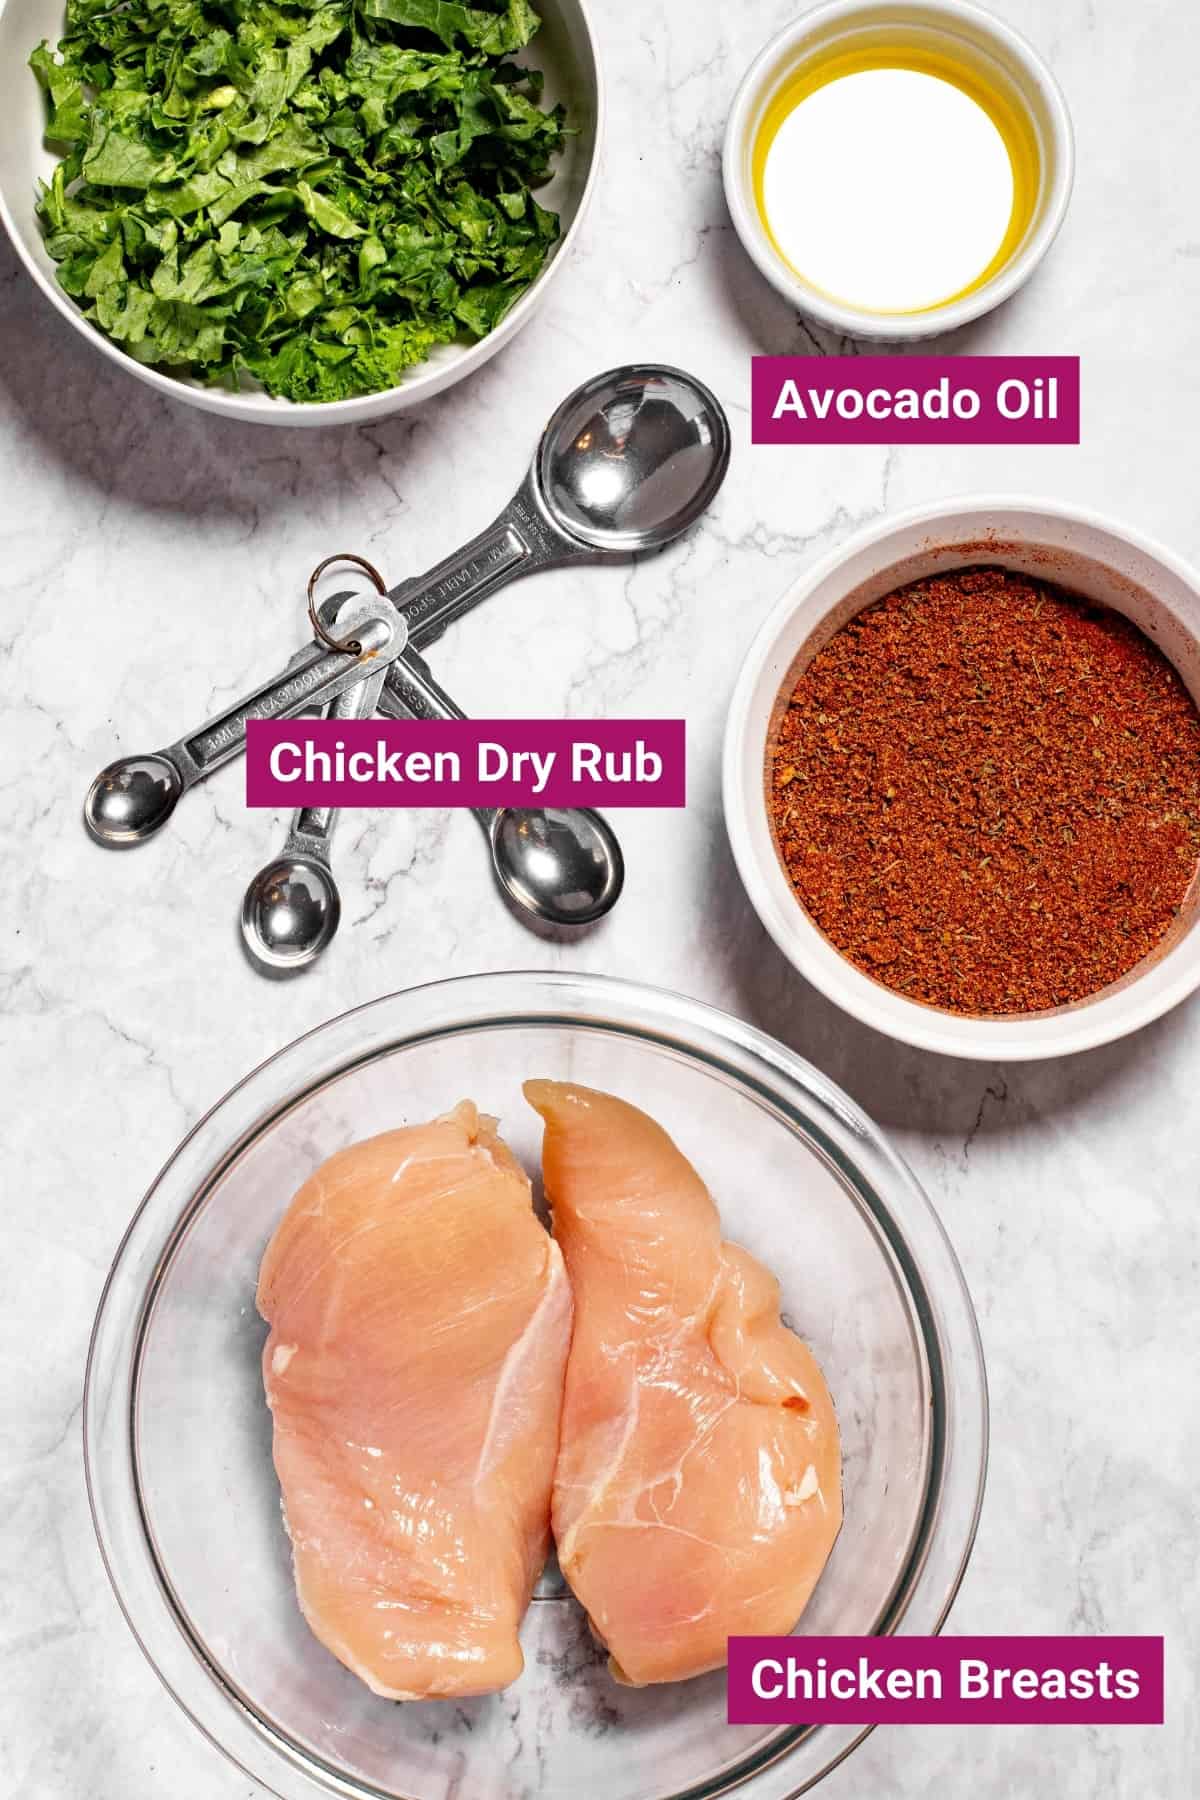 ingredients needed to make chicken breasts in the air fryer with a chicken dry rub: avocado oil, spicy chicken dry rub, and chicken breasts